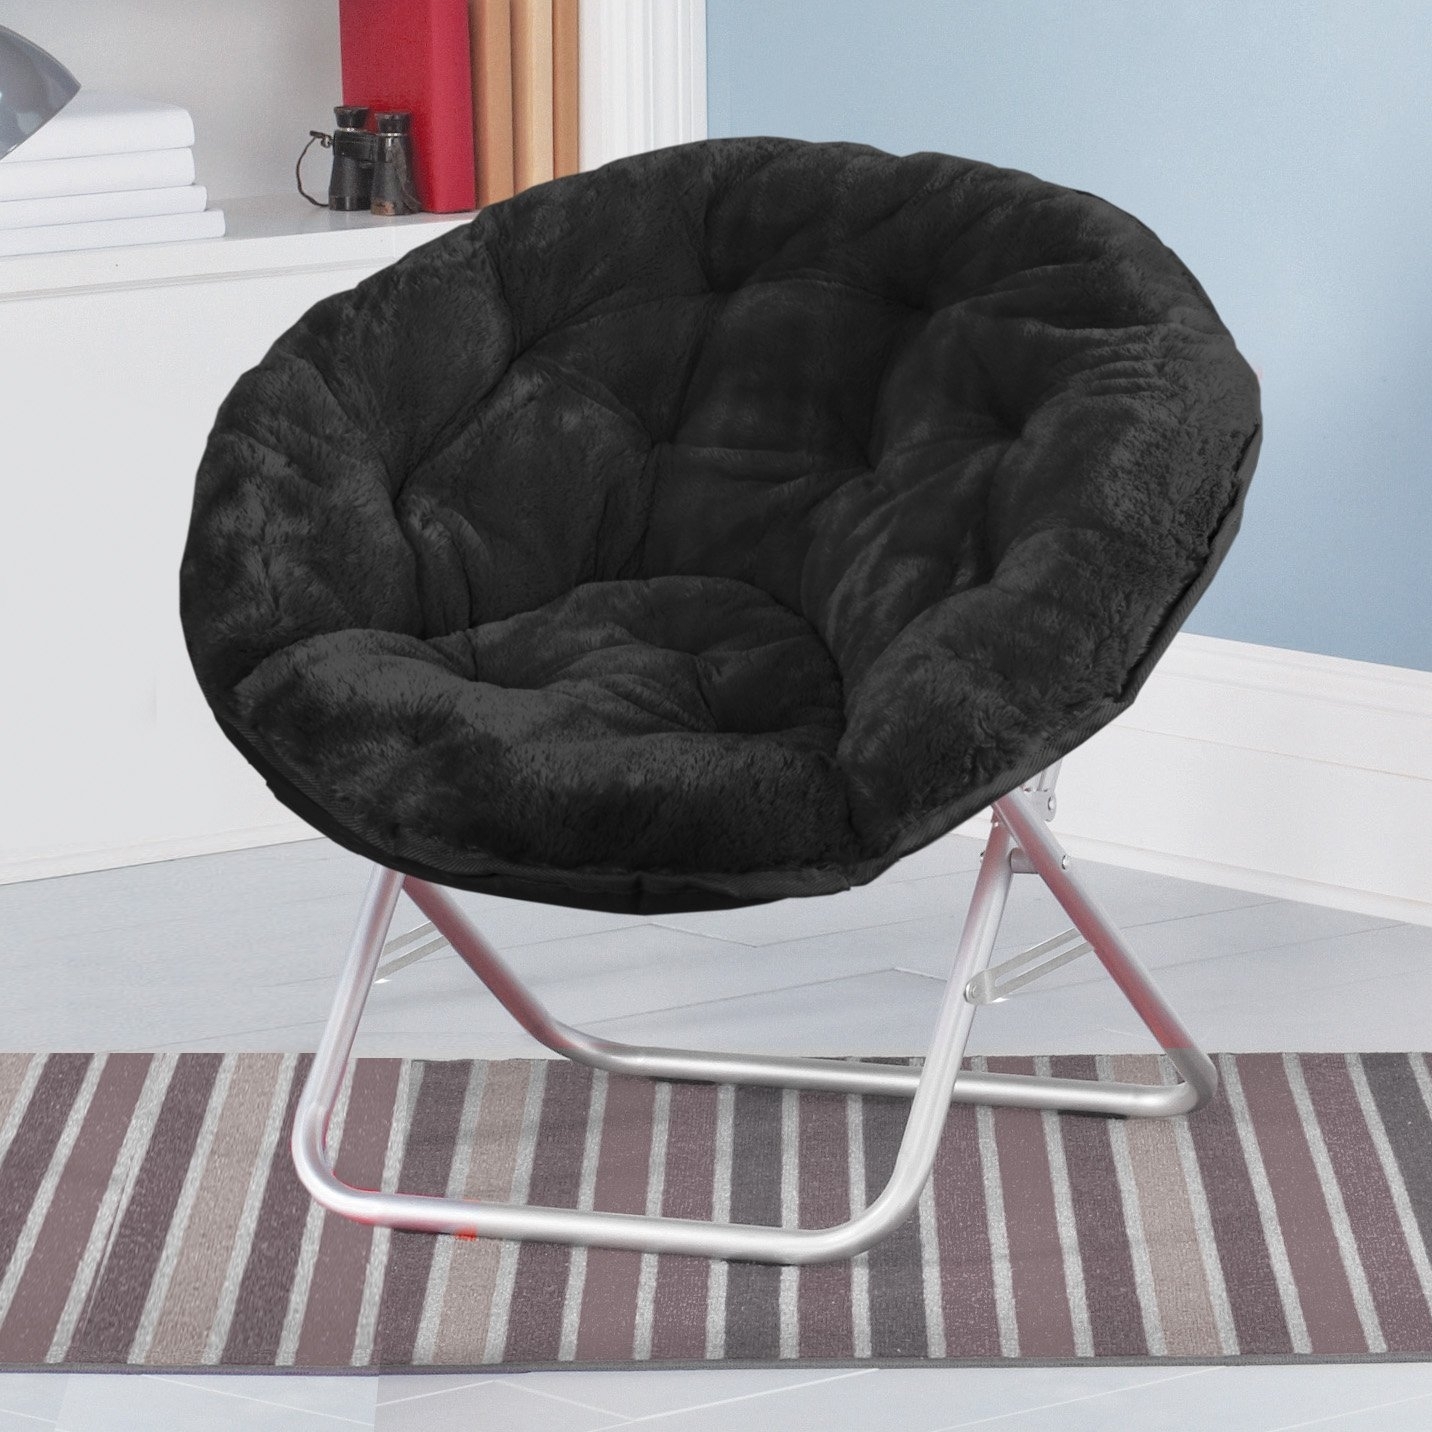 BRAND NEW FOLD AWAY MOON CHAIR IDEAL FOR GRAND PARENTS 